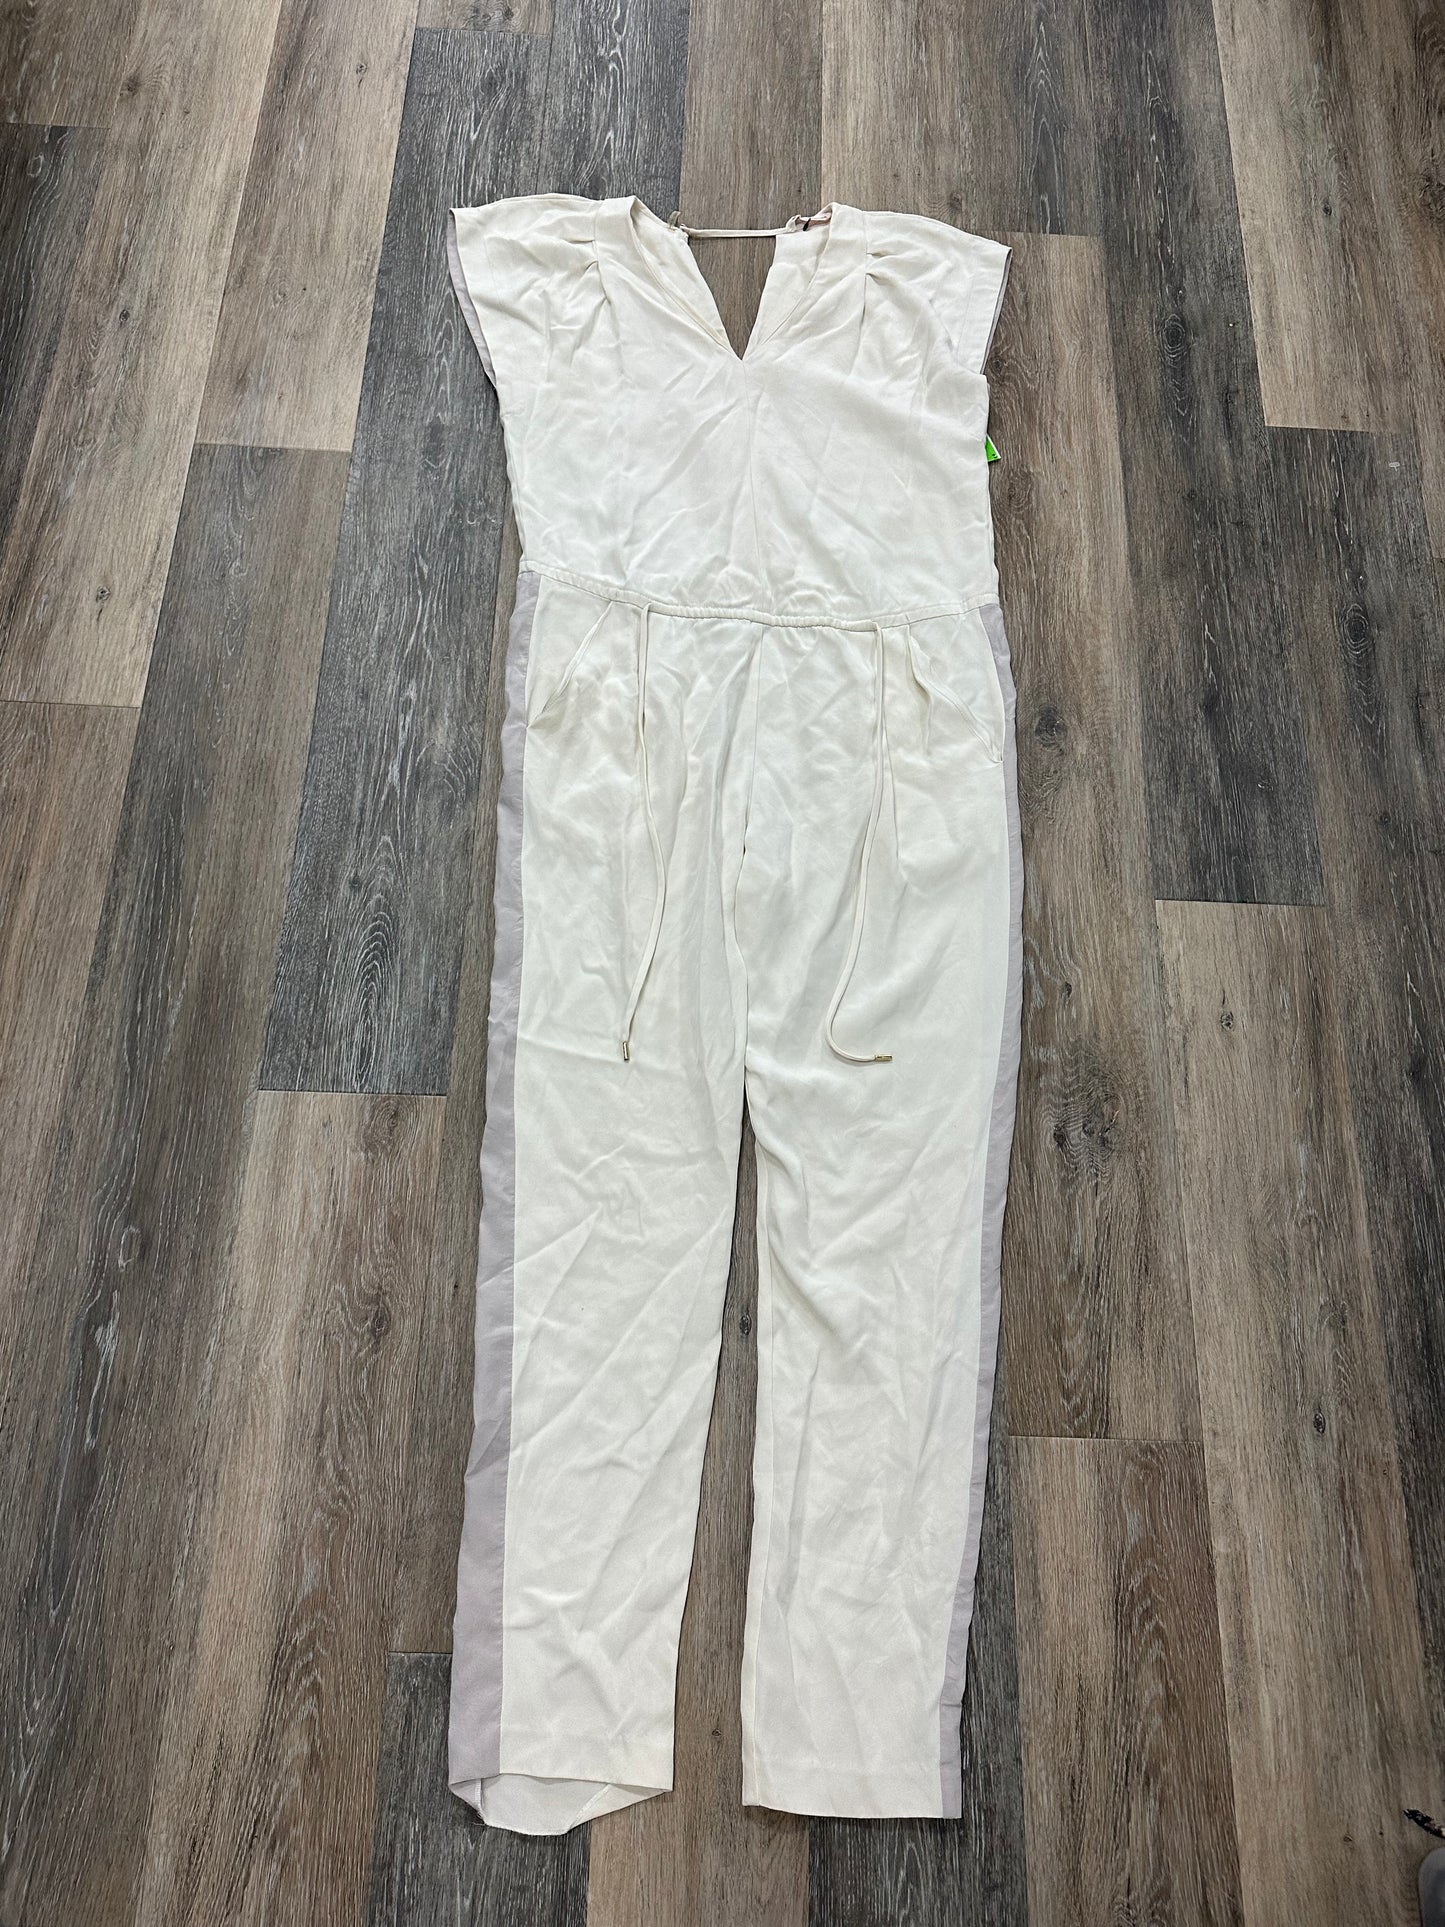 Jumpsuit By Rebecca Taylor  Size: 8